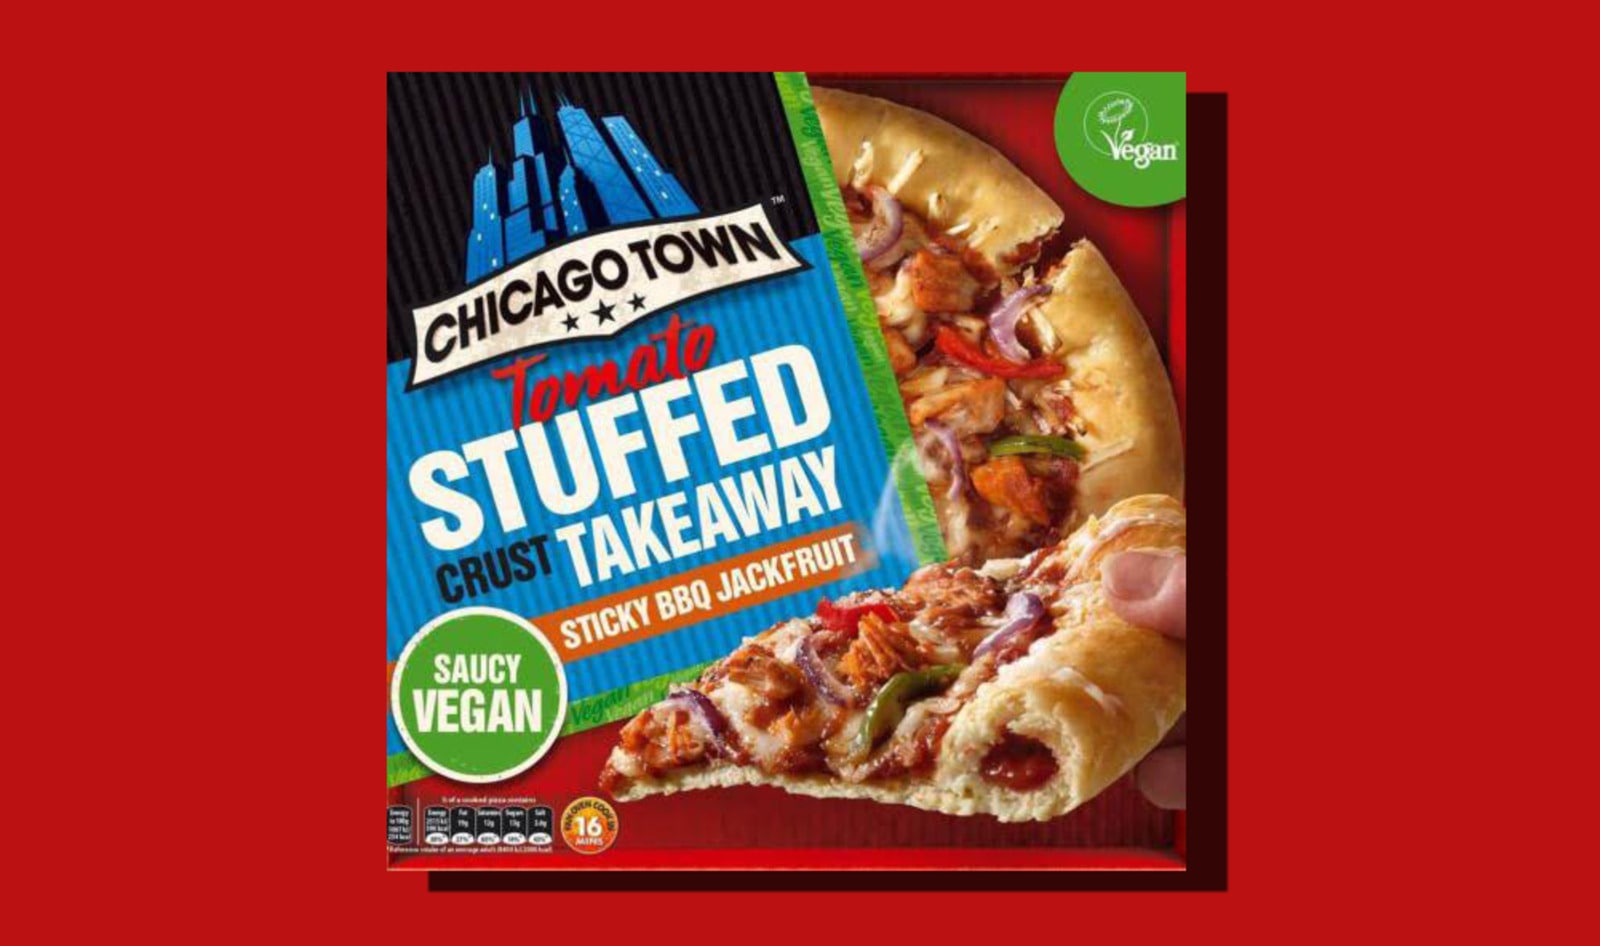 UK Brand Chicago Town to Launch Its First Vegan Pizza—and It’s Stuffed Crust